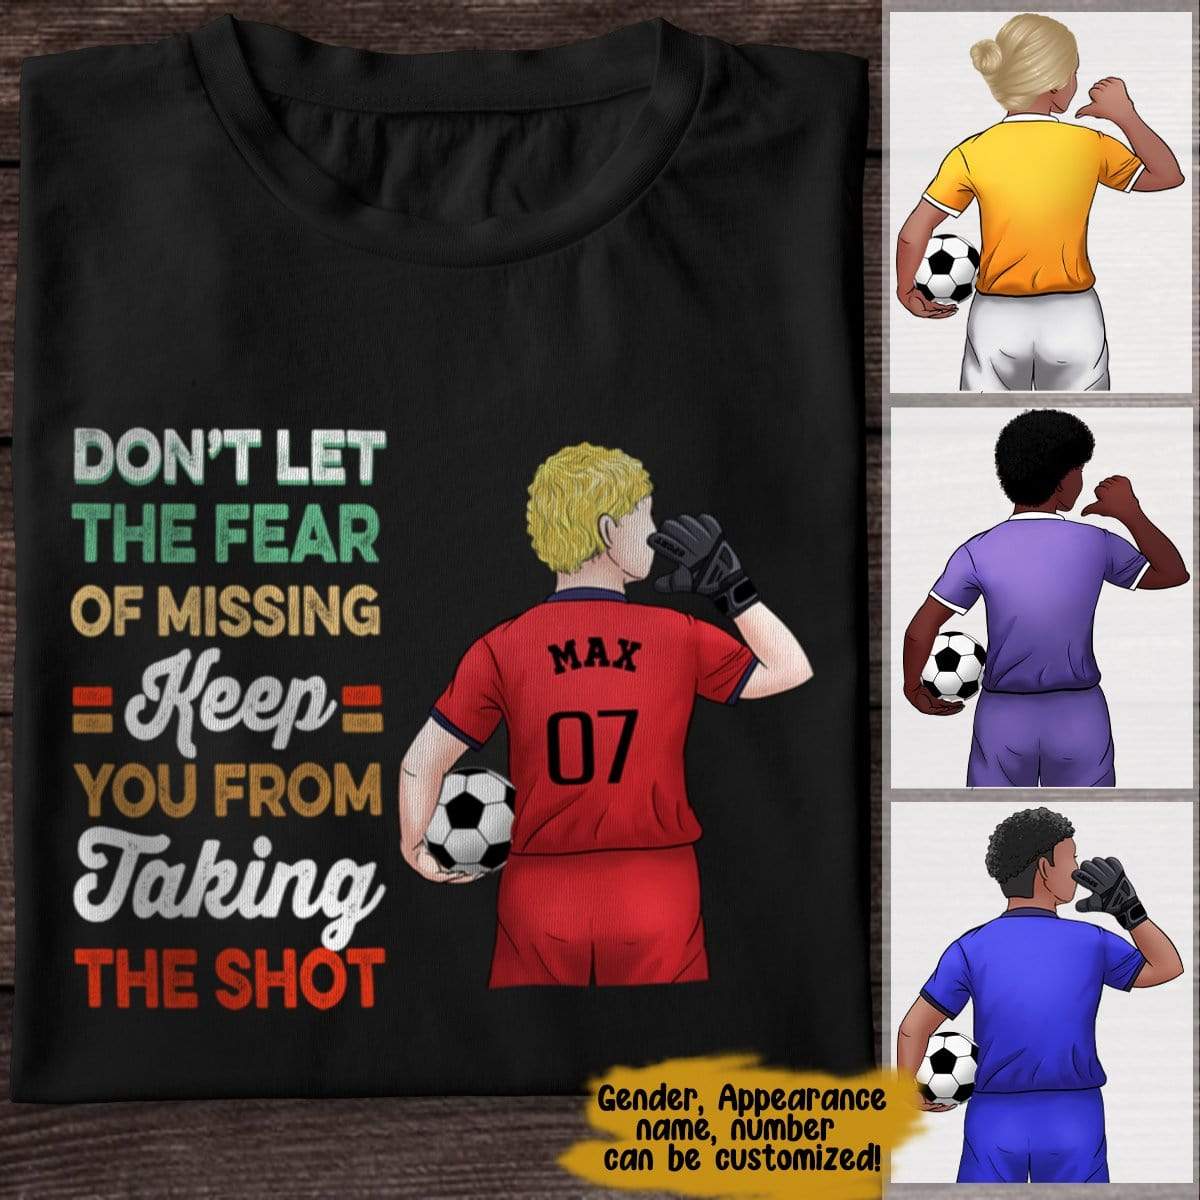 GeckoCustom Don't Let The Fear Keep You From Taking The Shot Soccer Shirt Premium Tee / P Black / S